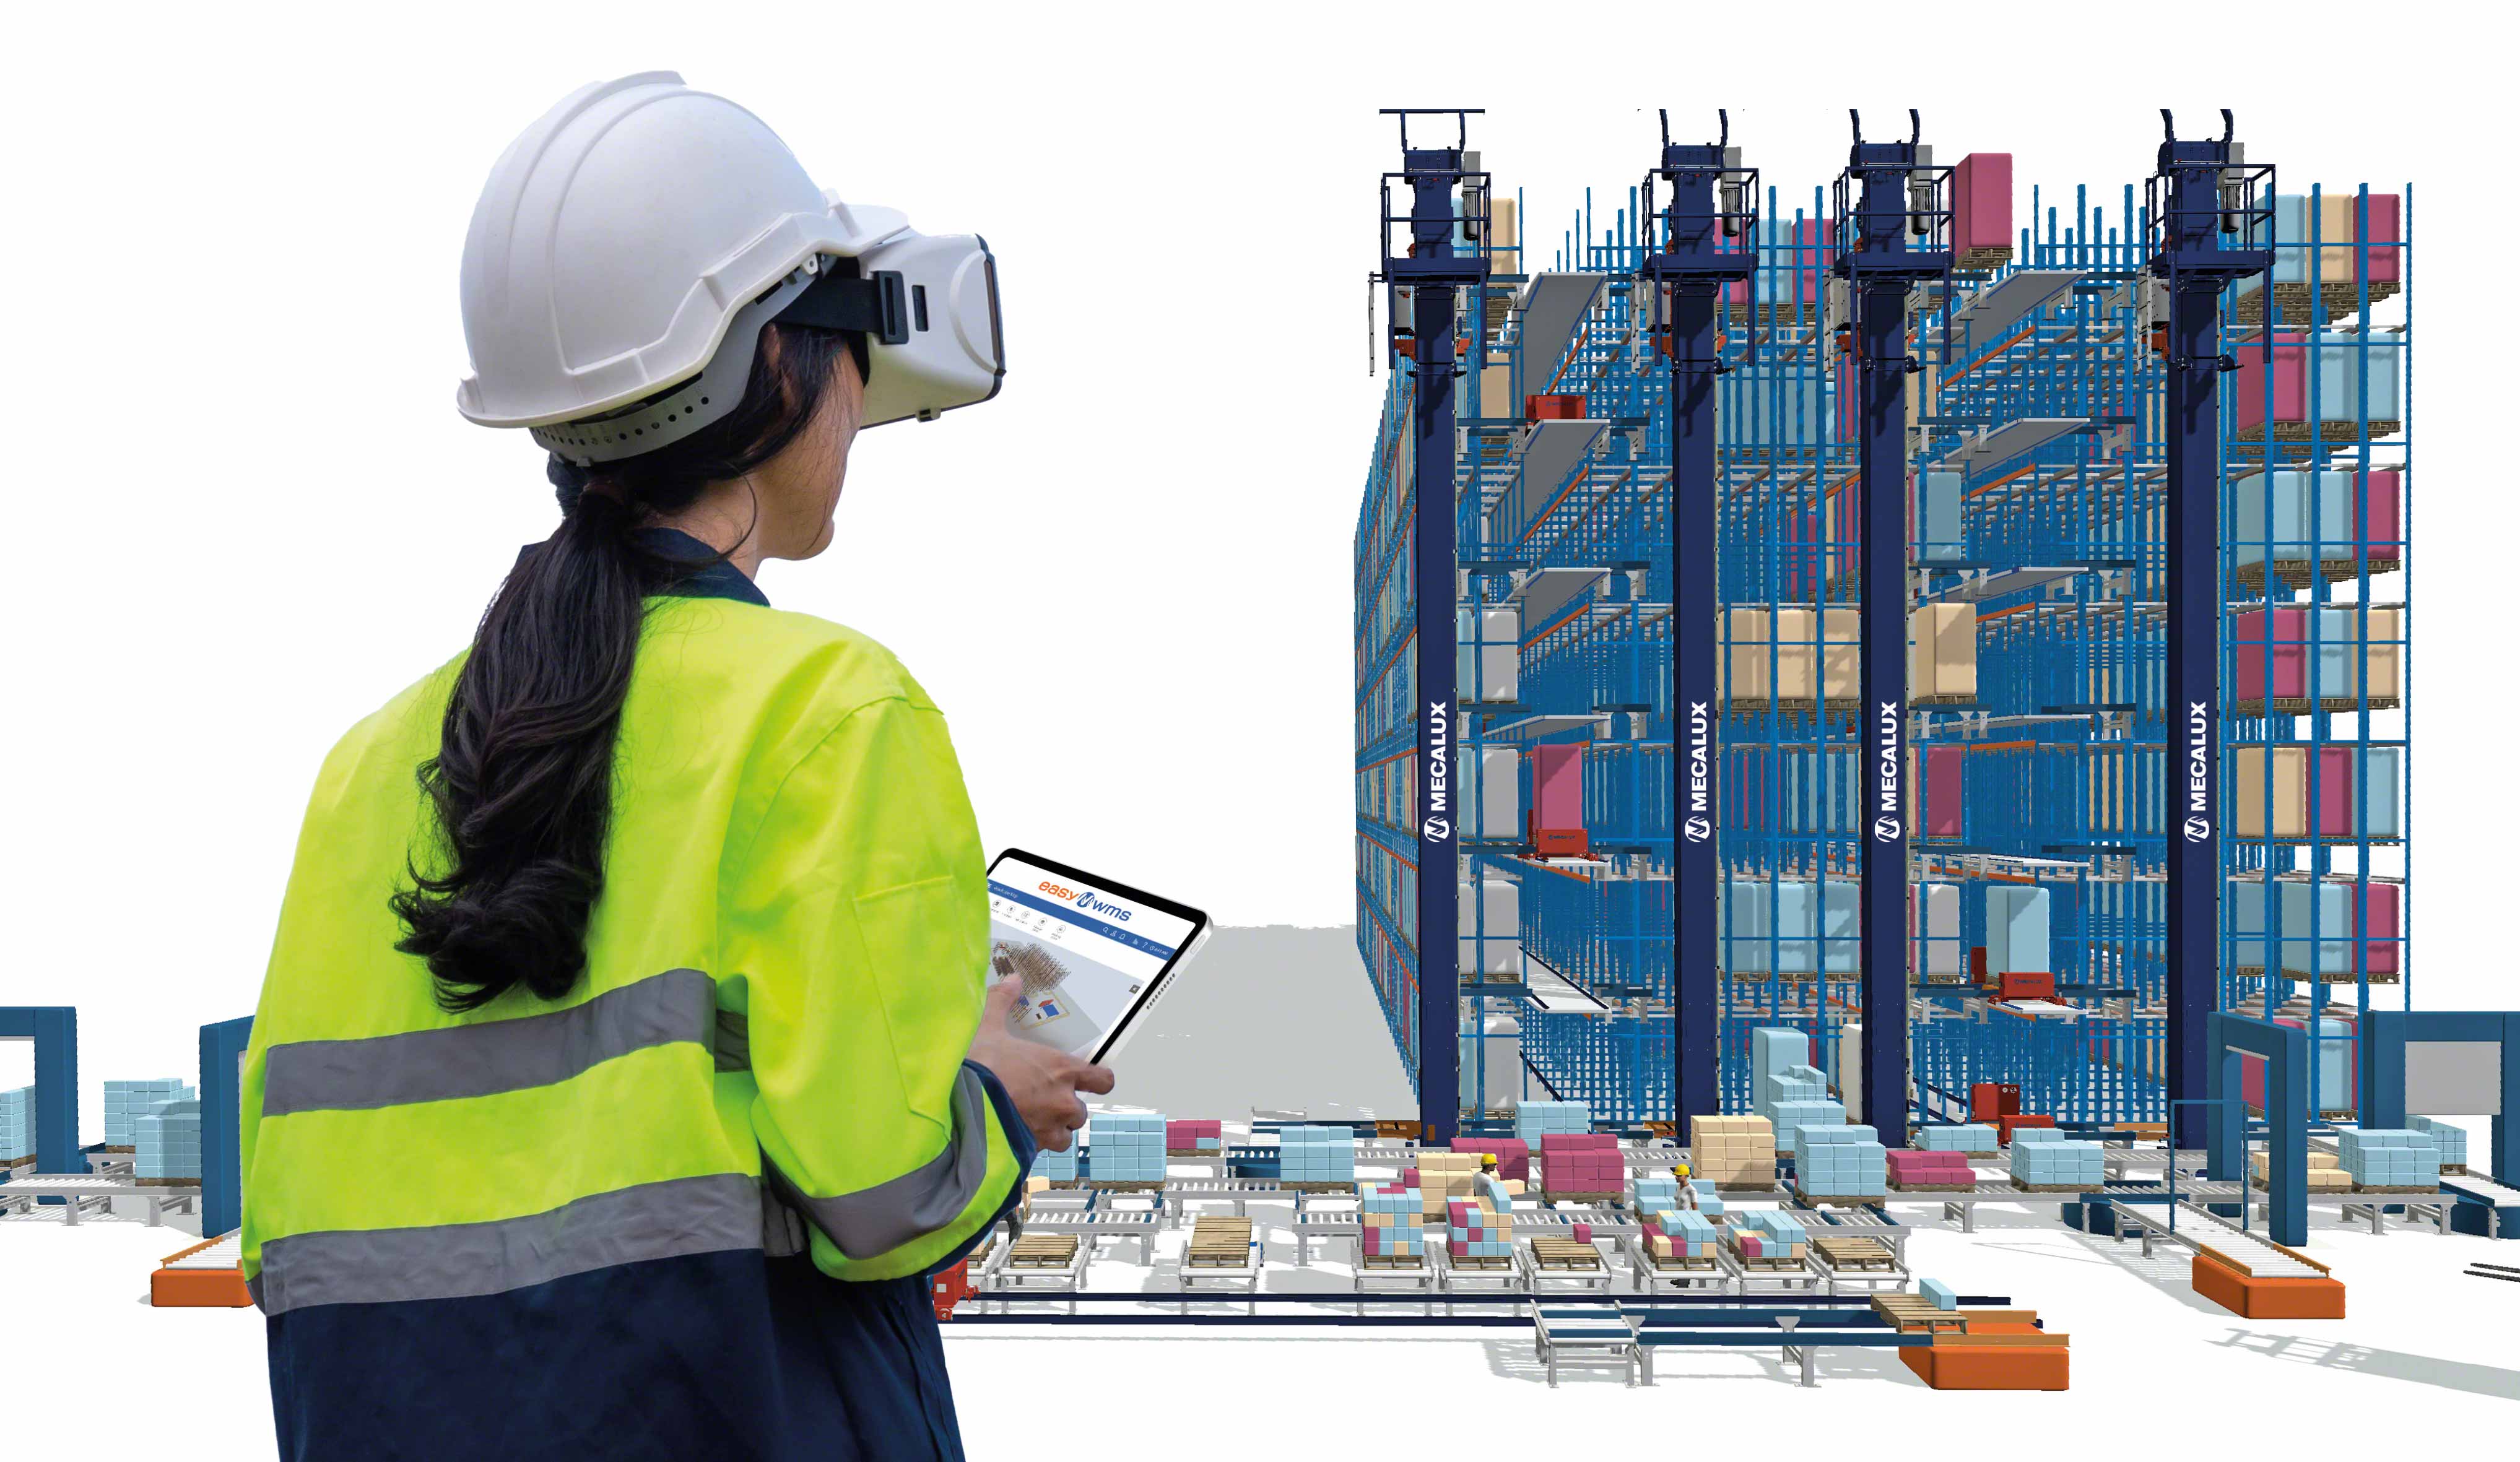 Augmented reality superimposes digital data on the user’s physical environment